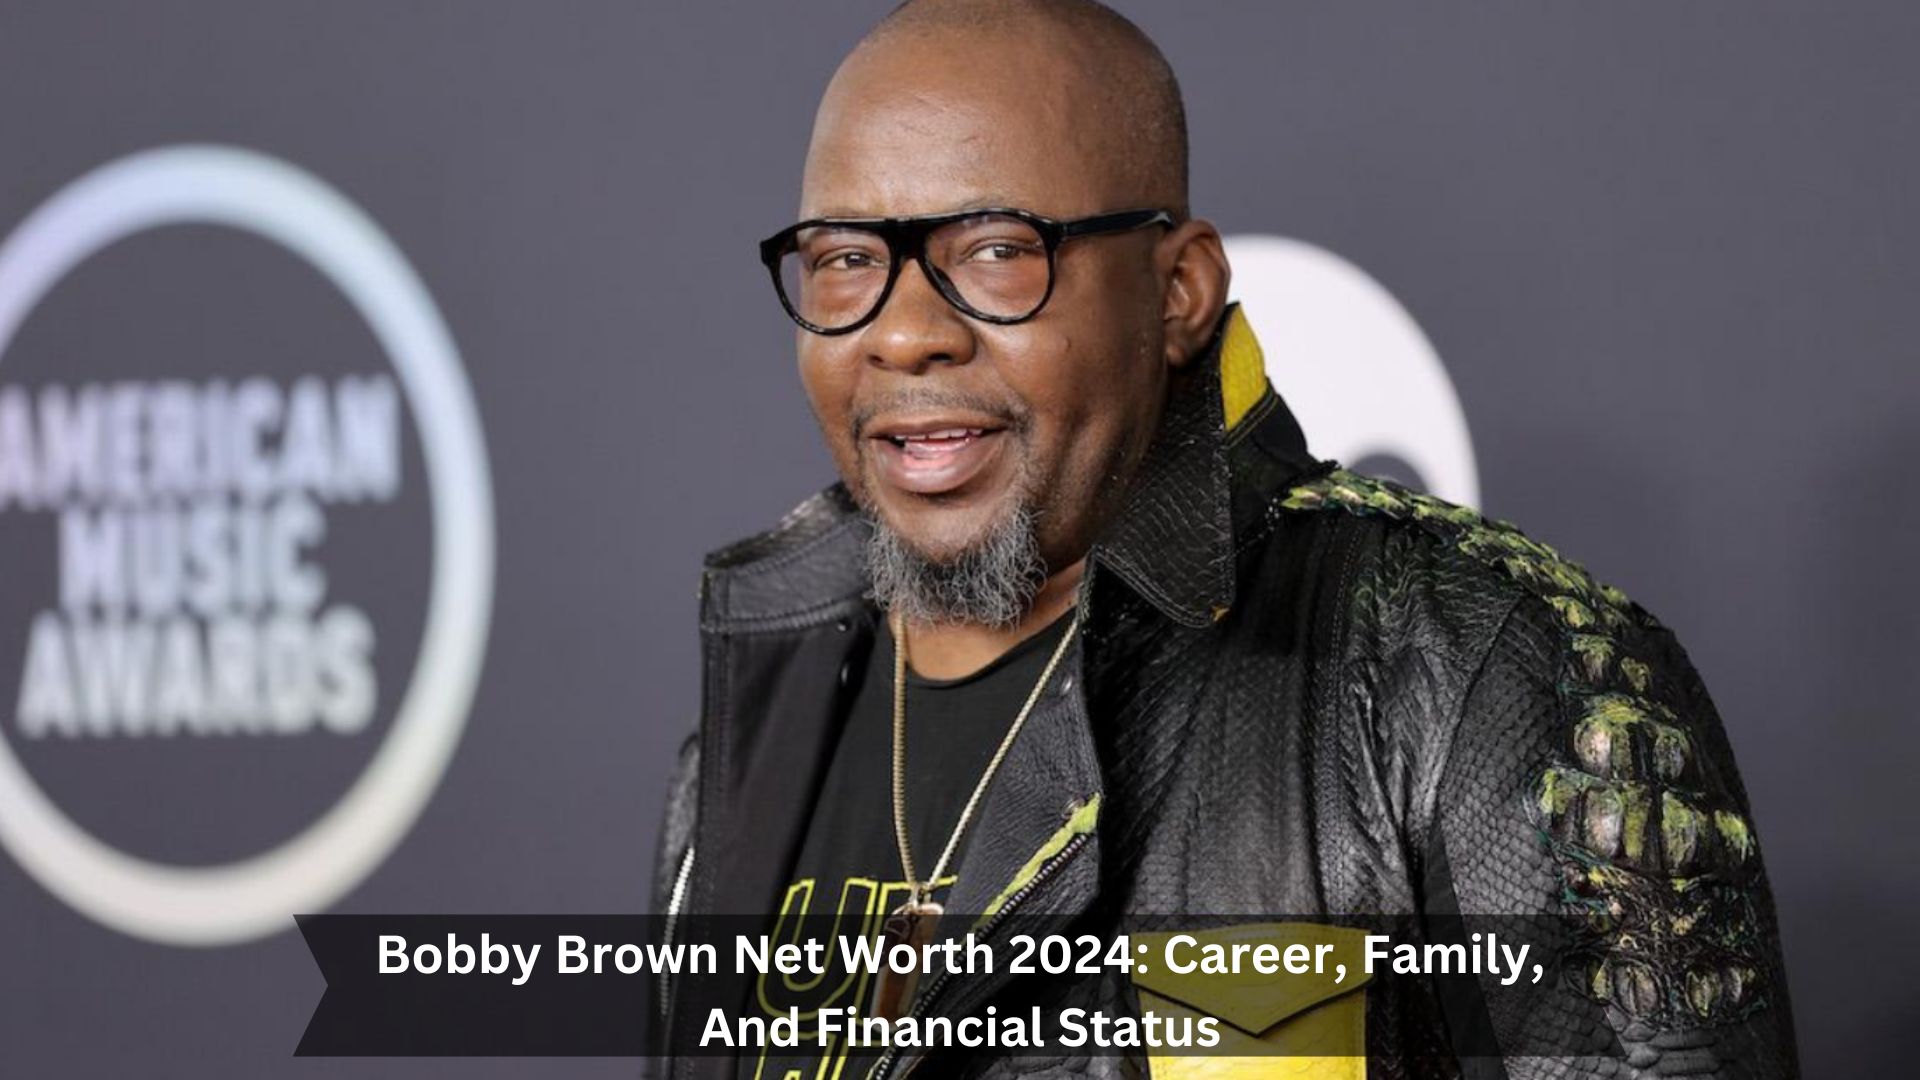 Bobby-Brown-Net-Worth-2024-Career-Family-And-Financial-Status